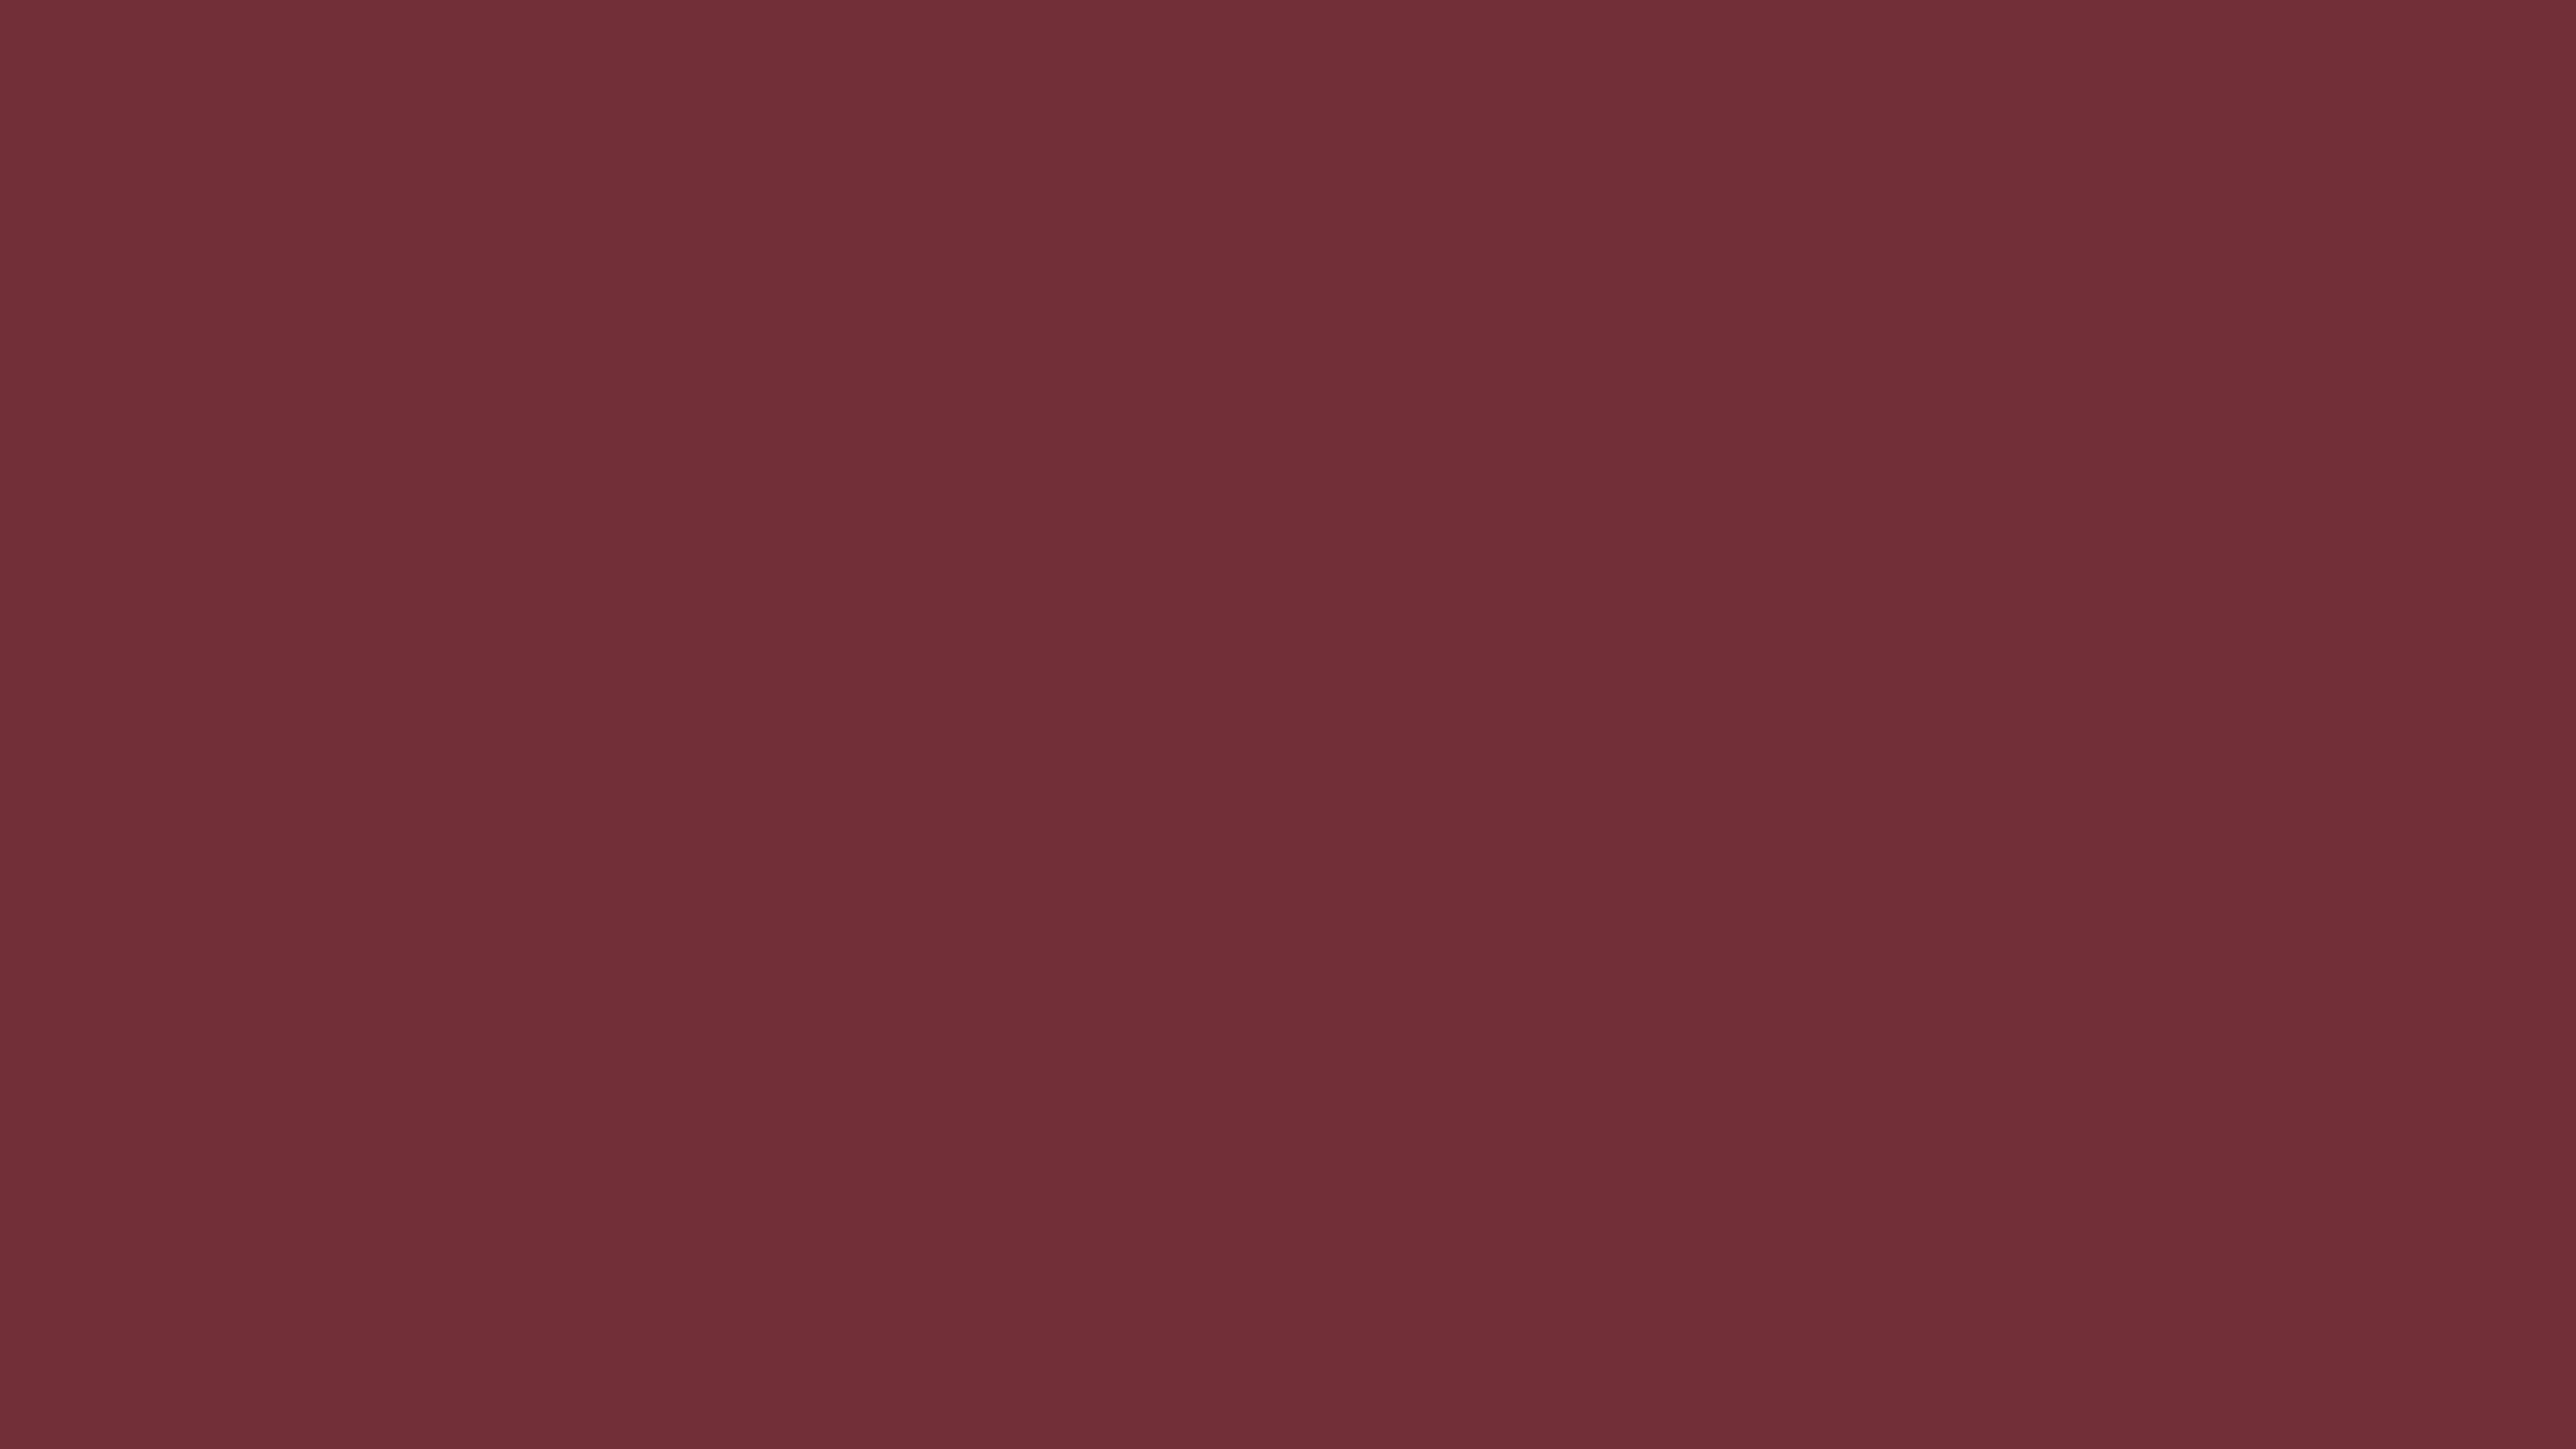 3840x2160 Wine Solid Color Background